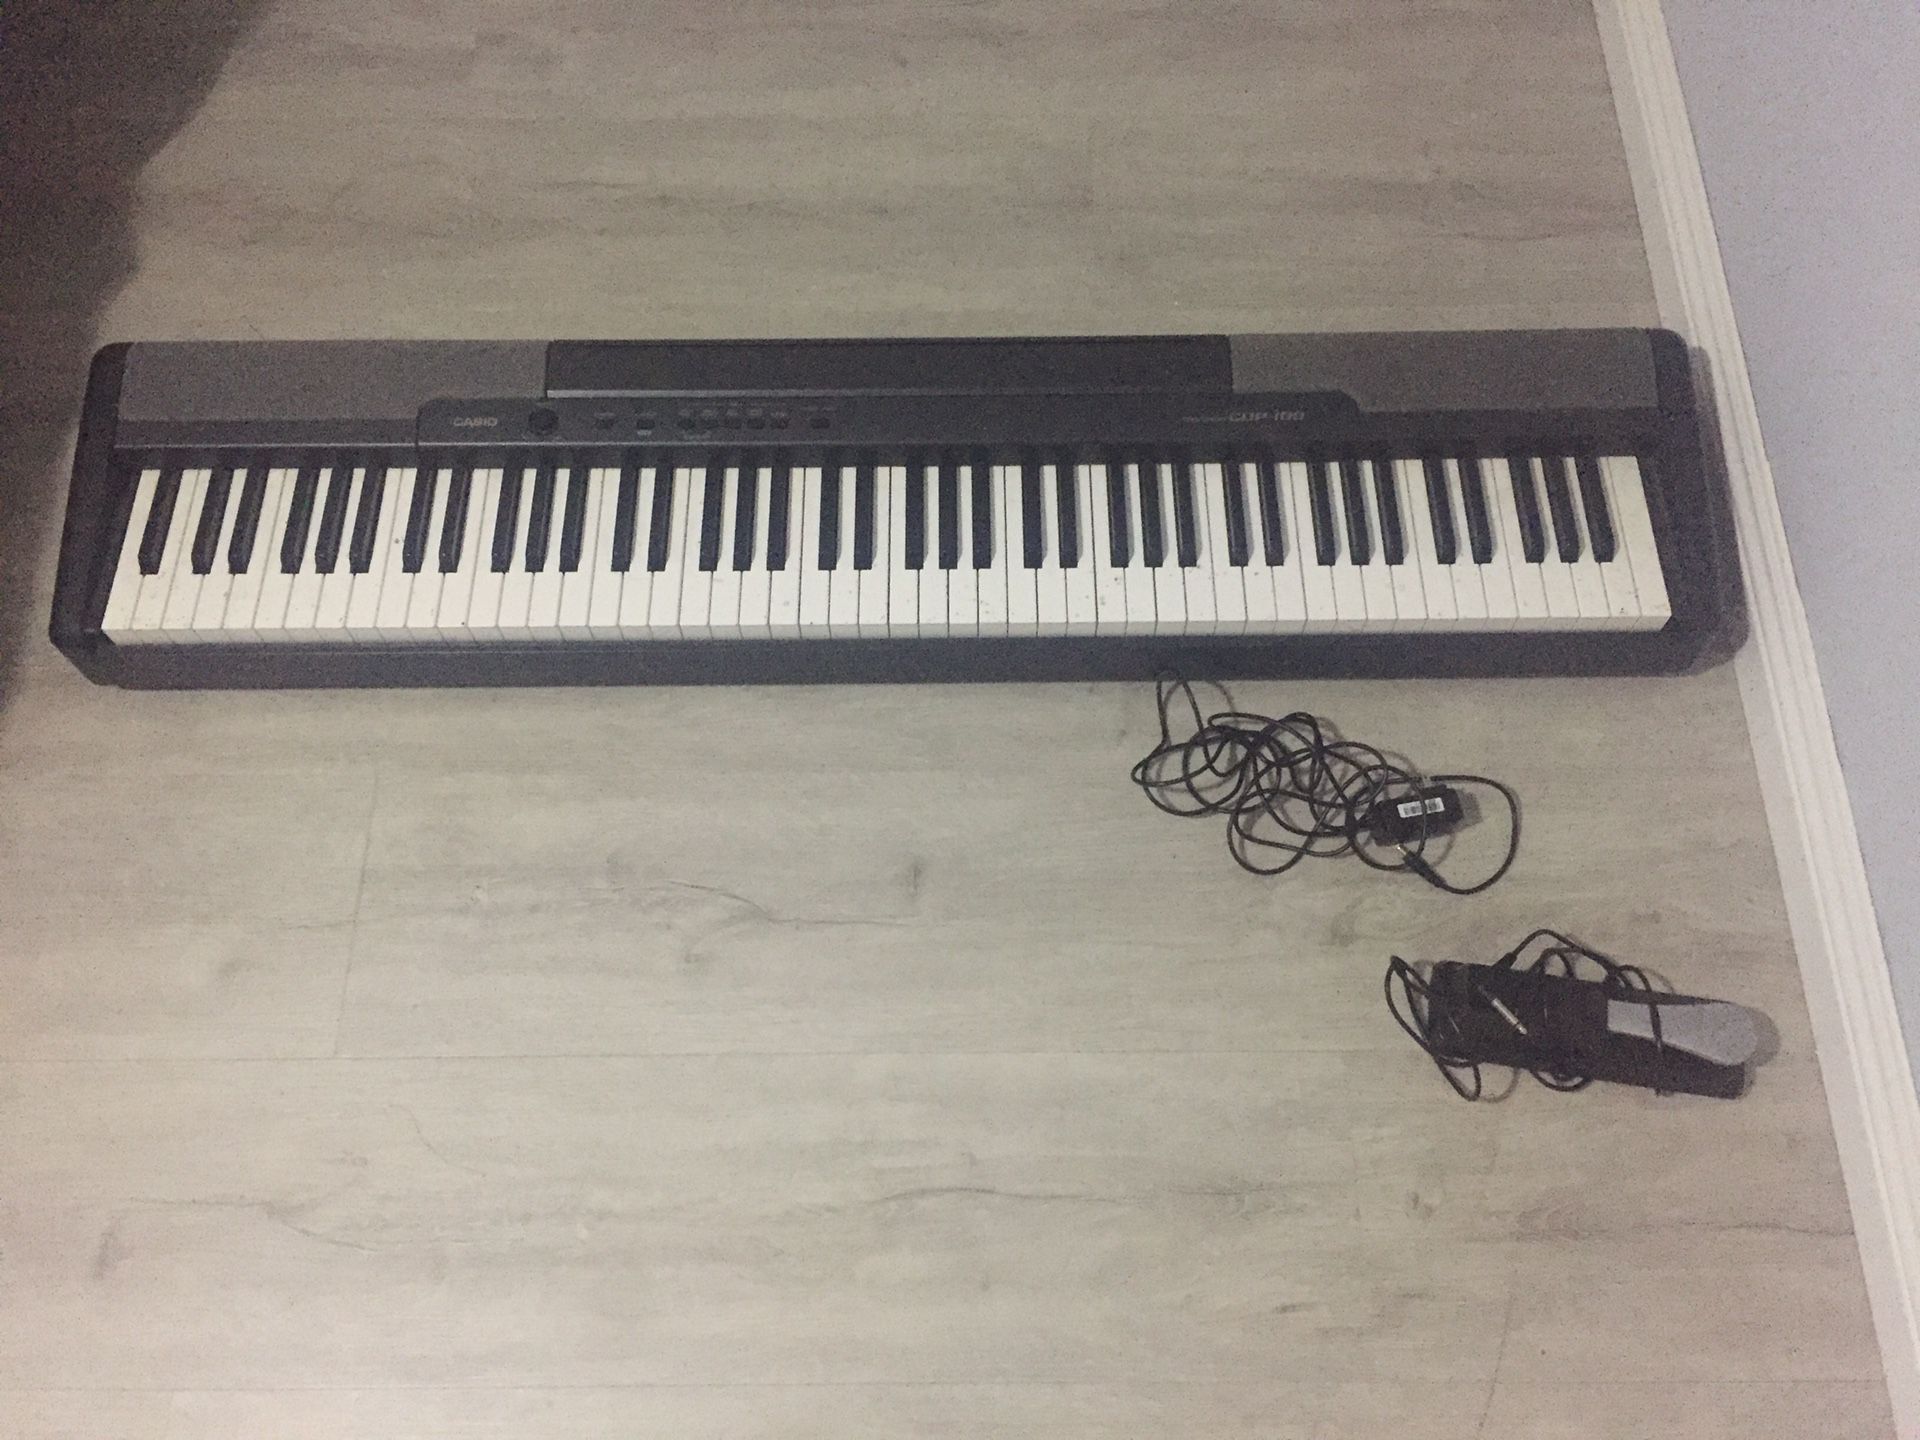 Casio keyboard and pedal